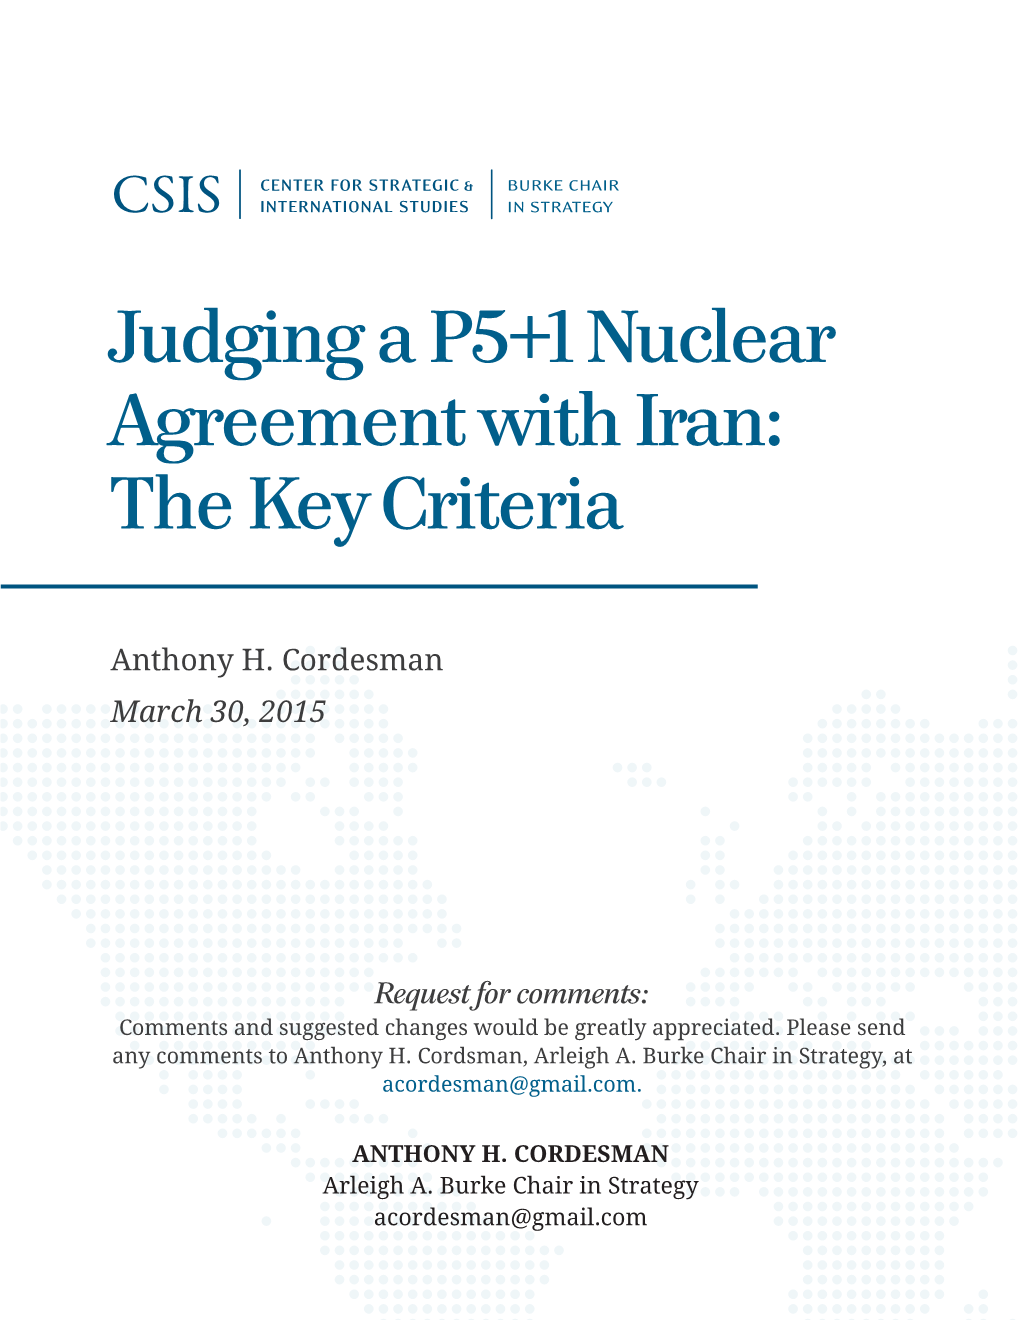 Judging a P5+1 Nuclear Agreement with Iran: the Key Criteria